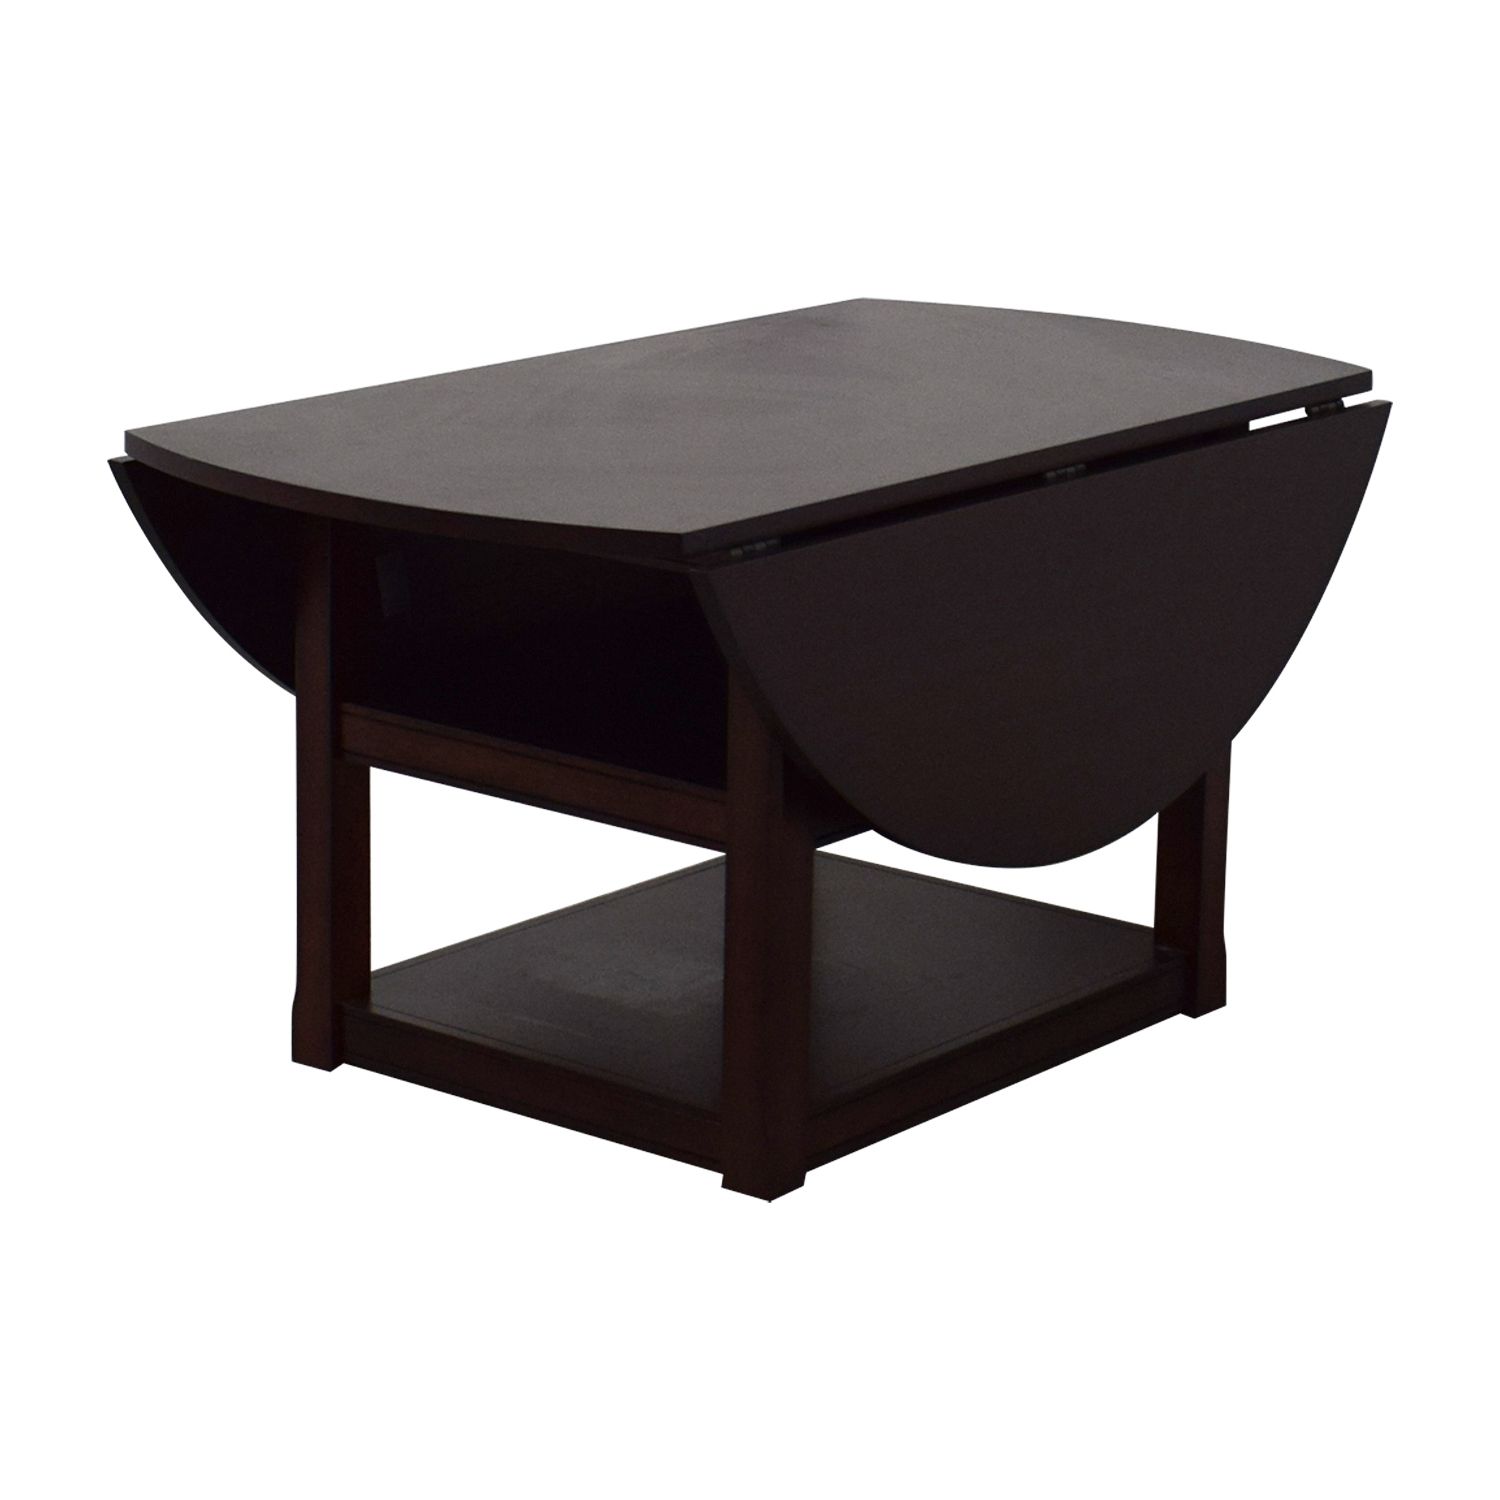 [%44% Off – Pottery Barn Pottery Barn Shayne Drop Leaf Kitchen Table / Tables Regarding Well Known Black Shayne Drop Leaf Kitchen Tables|black Shayne Drop Leaf Kitchen Tables Pertaining To Most Recent 44% Off – Pottery Barn Pottery Barn Shayne Drop Leaf Kitchen Table / Tables|latest Black Shayne Drop Leaf Kitchen Tables In 44% Off – Pottery Barn Pottery Barn Shayne Drop Leaf Kitchen Table / Tables|2019 44% Off – Pottery Barn Pottery Barn Shayne Drop Leaf Kitchen Table / Tables Pertaining To Black Shayne Drop Leaf Kitchen Tables%] (View 9 of 25)